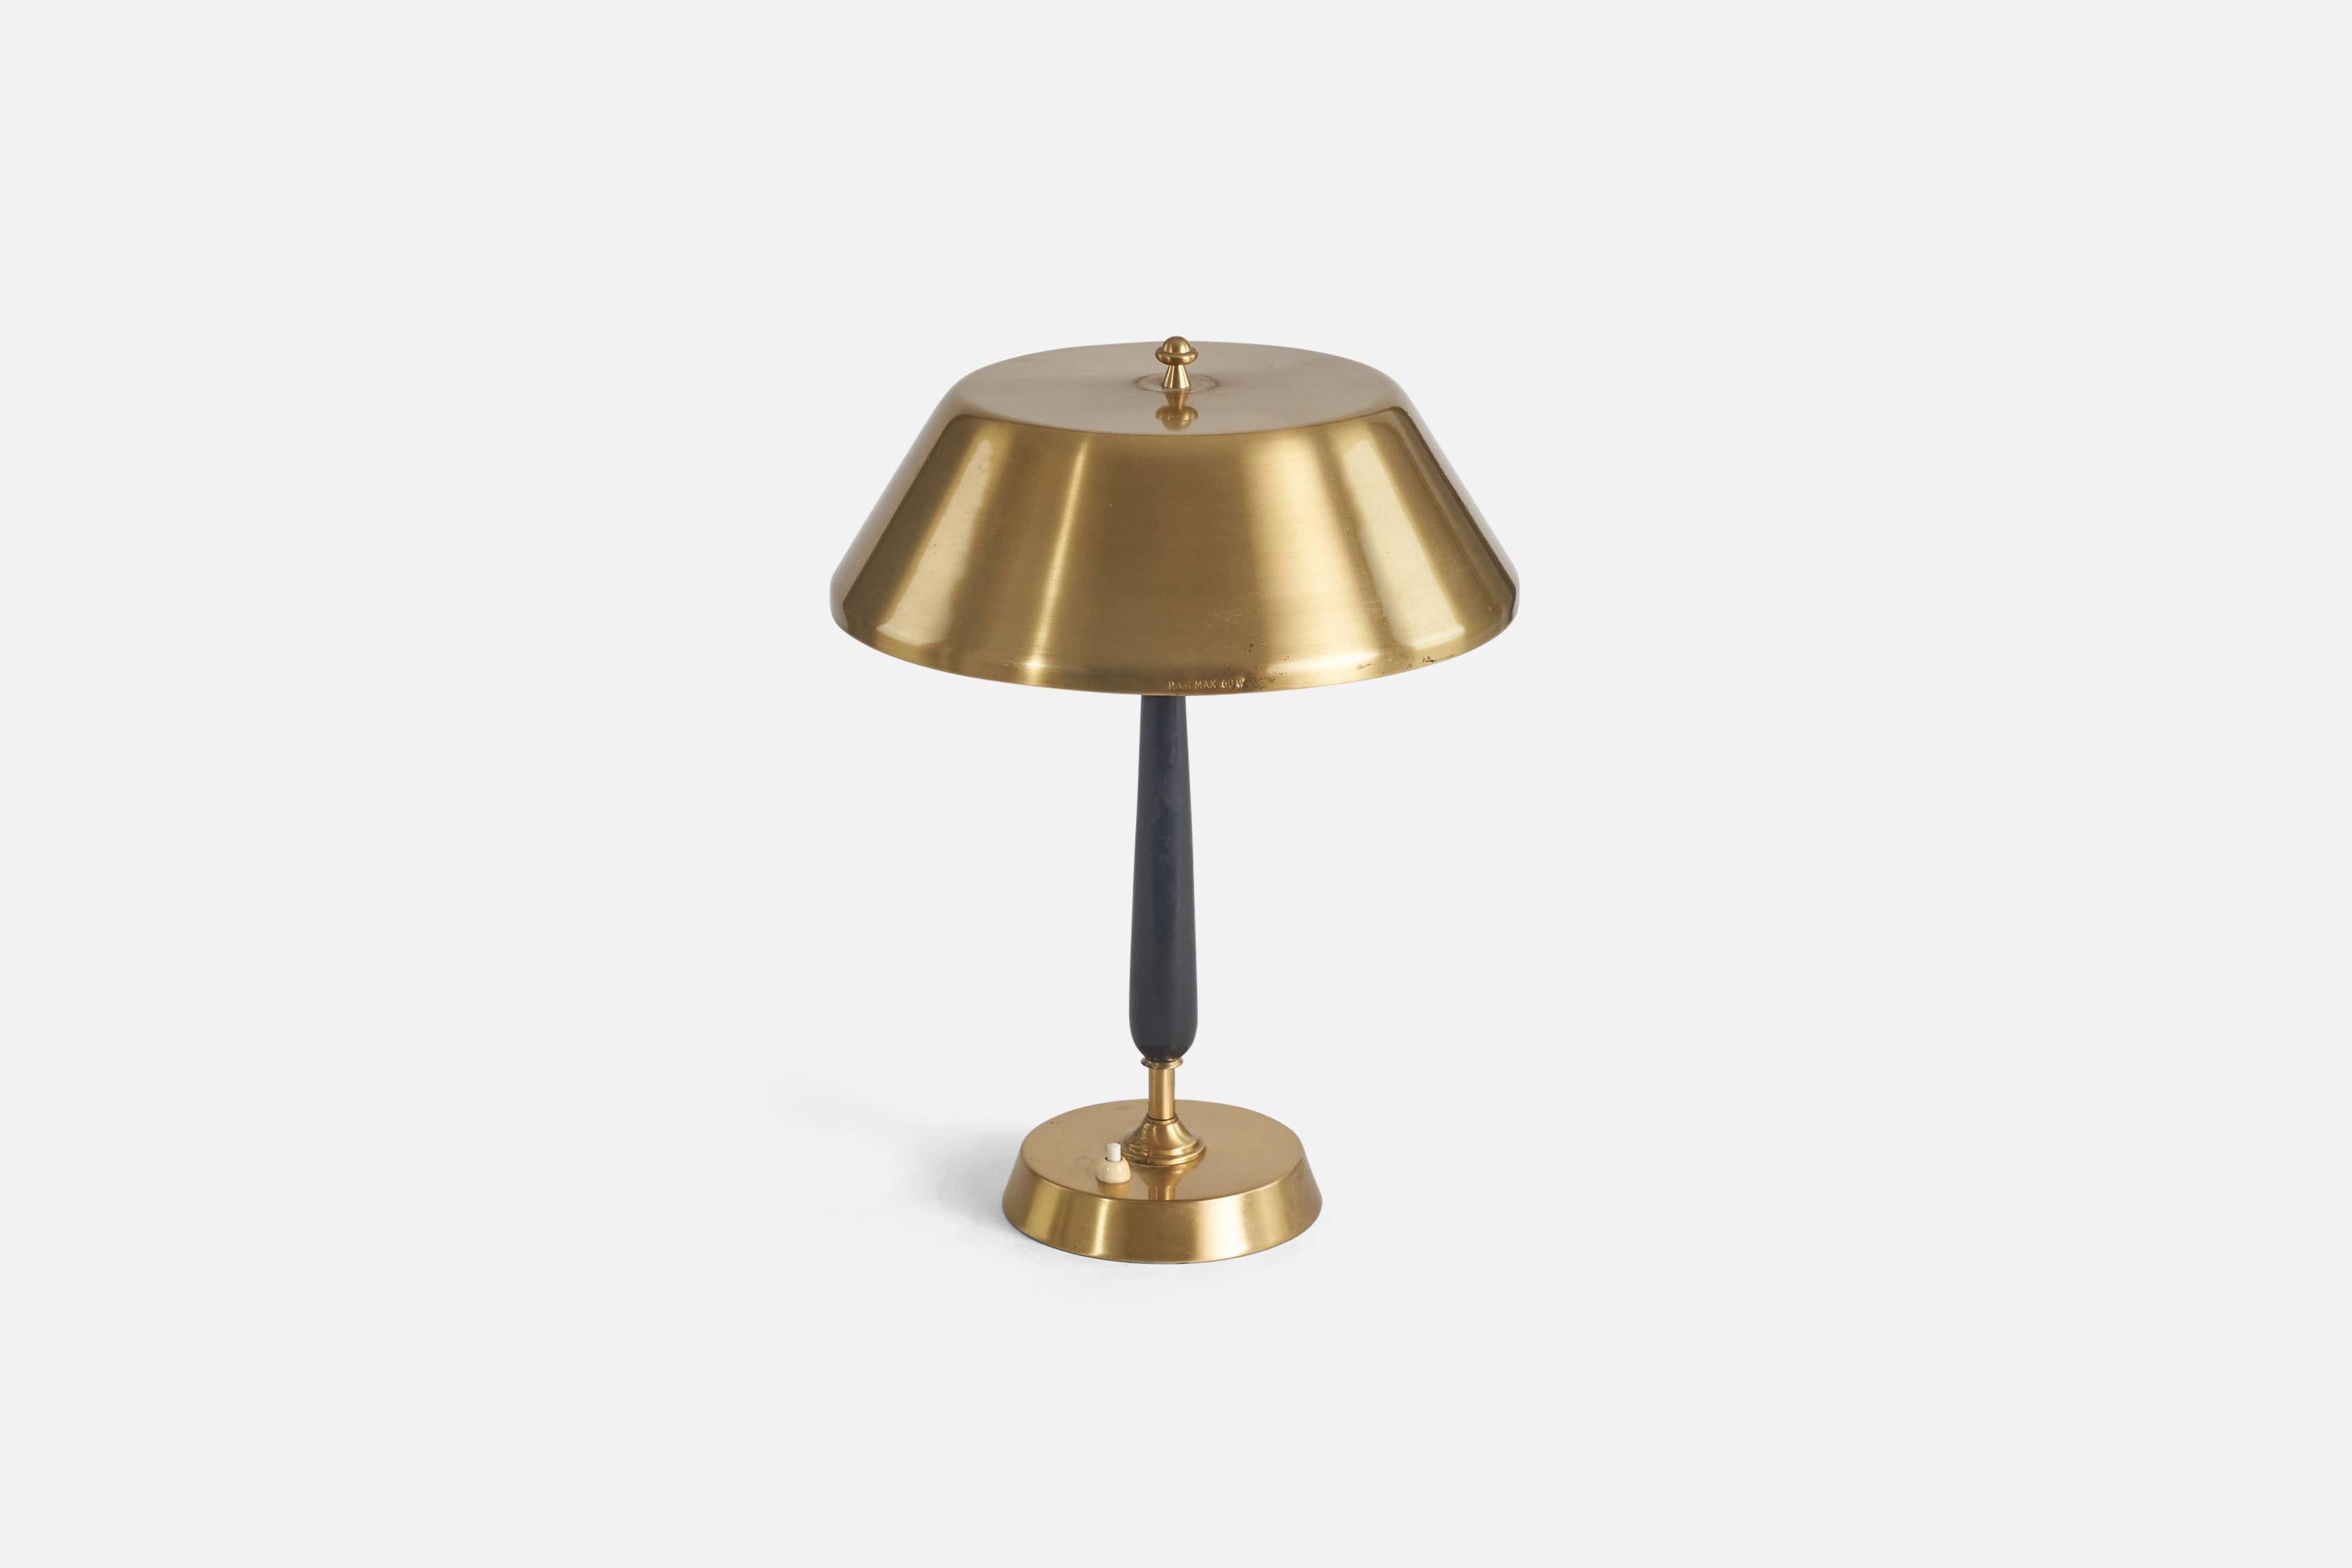 A brass and black-painted wooden table lamp designed and produced in Sweden, late 1940s.

Socket takes standard E-26 medium base bulb.
There is no maximum wattage stated on the fixture.